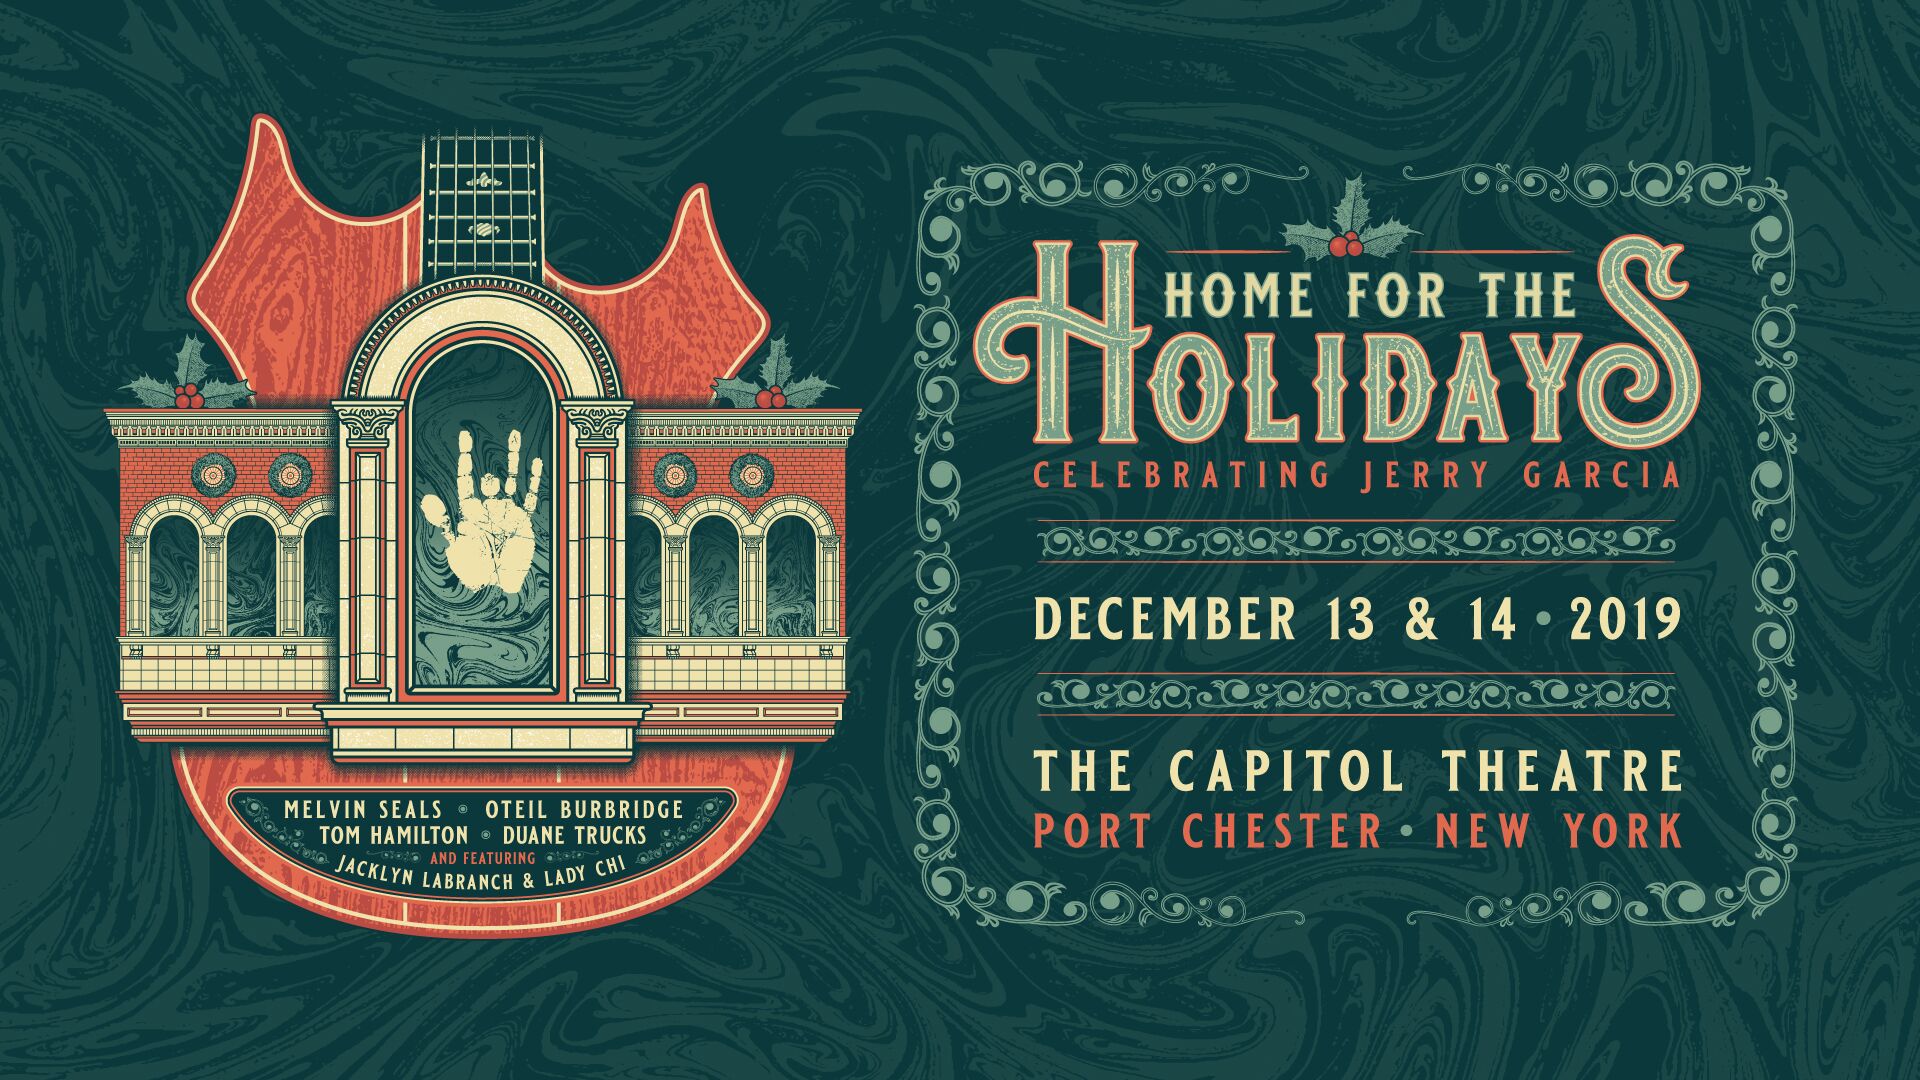 Enter to Win Tickets and Hotel Accommodations to Home for the Holidays Celebrating Jerry Garcia